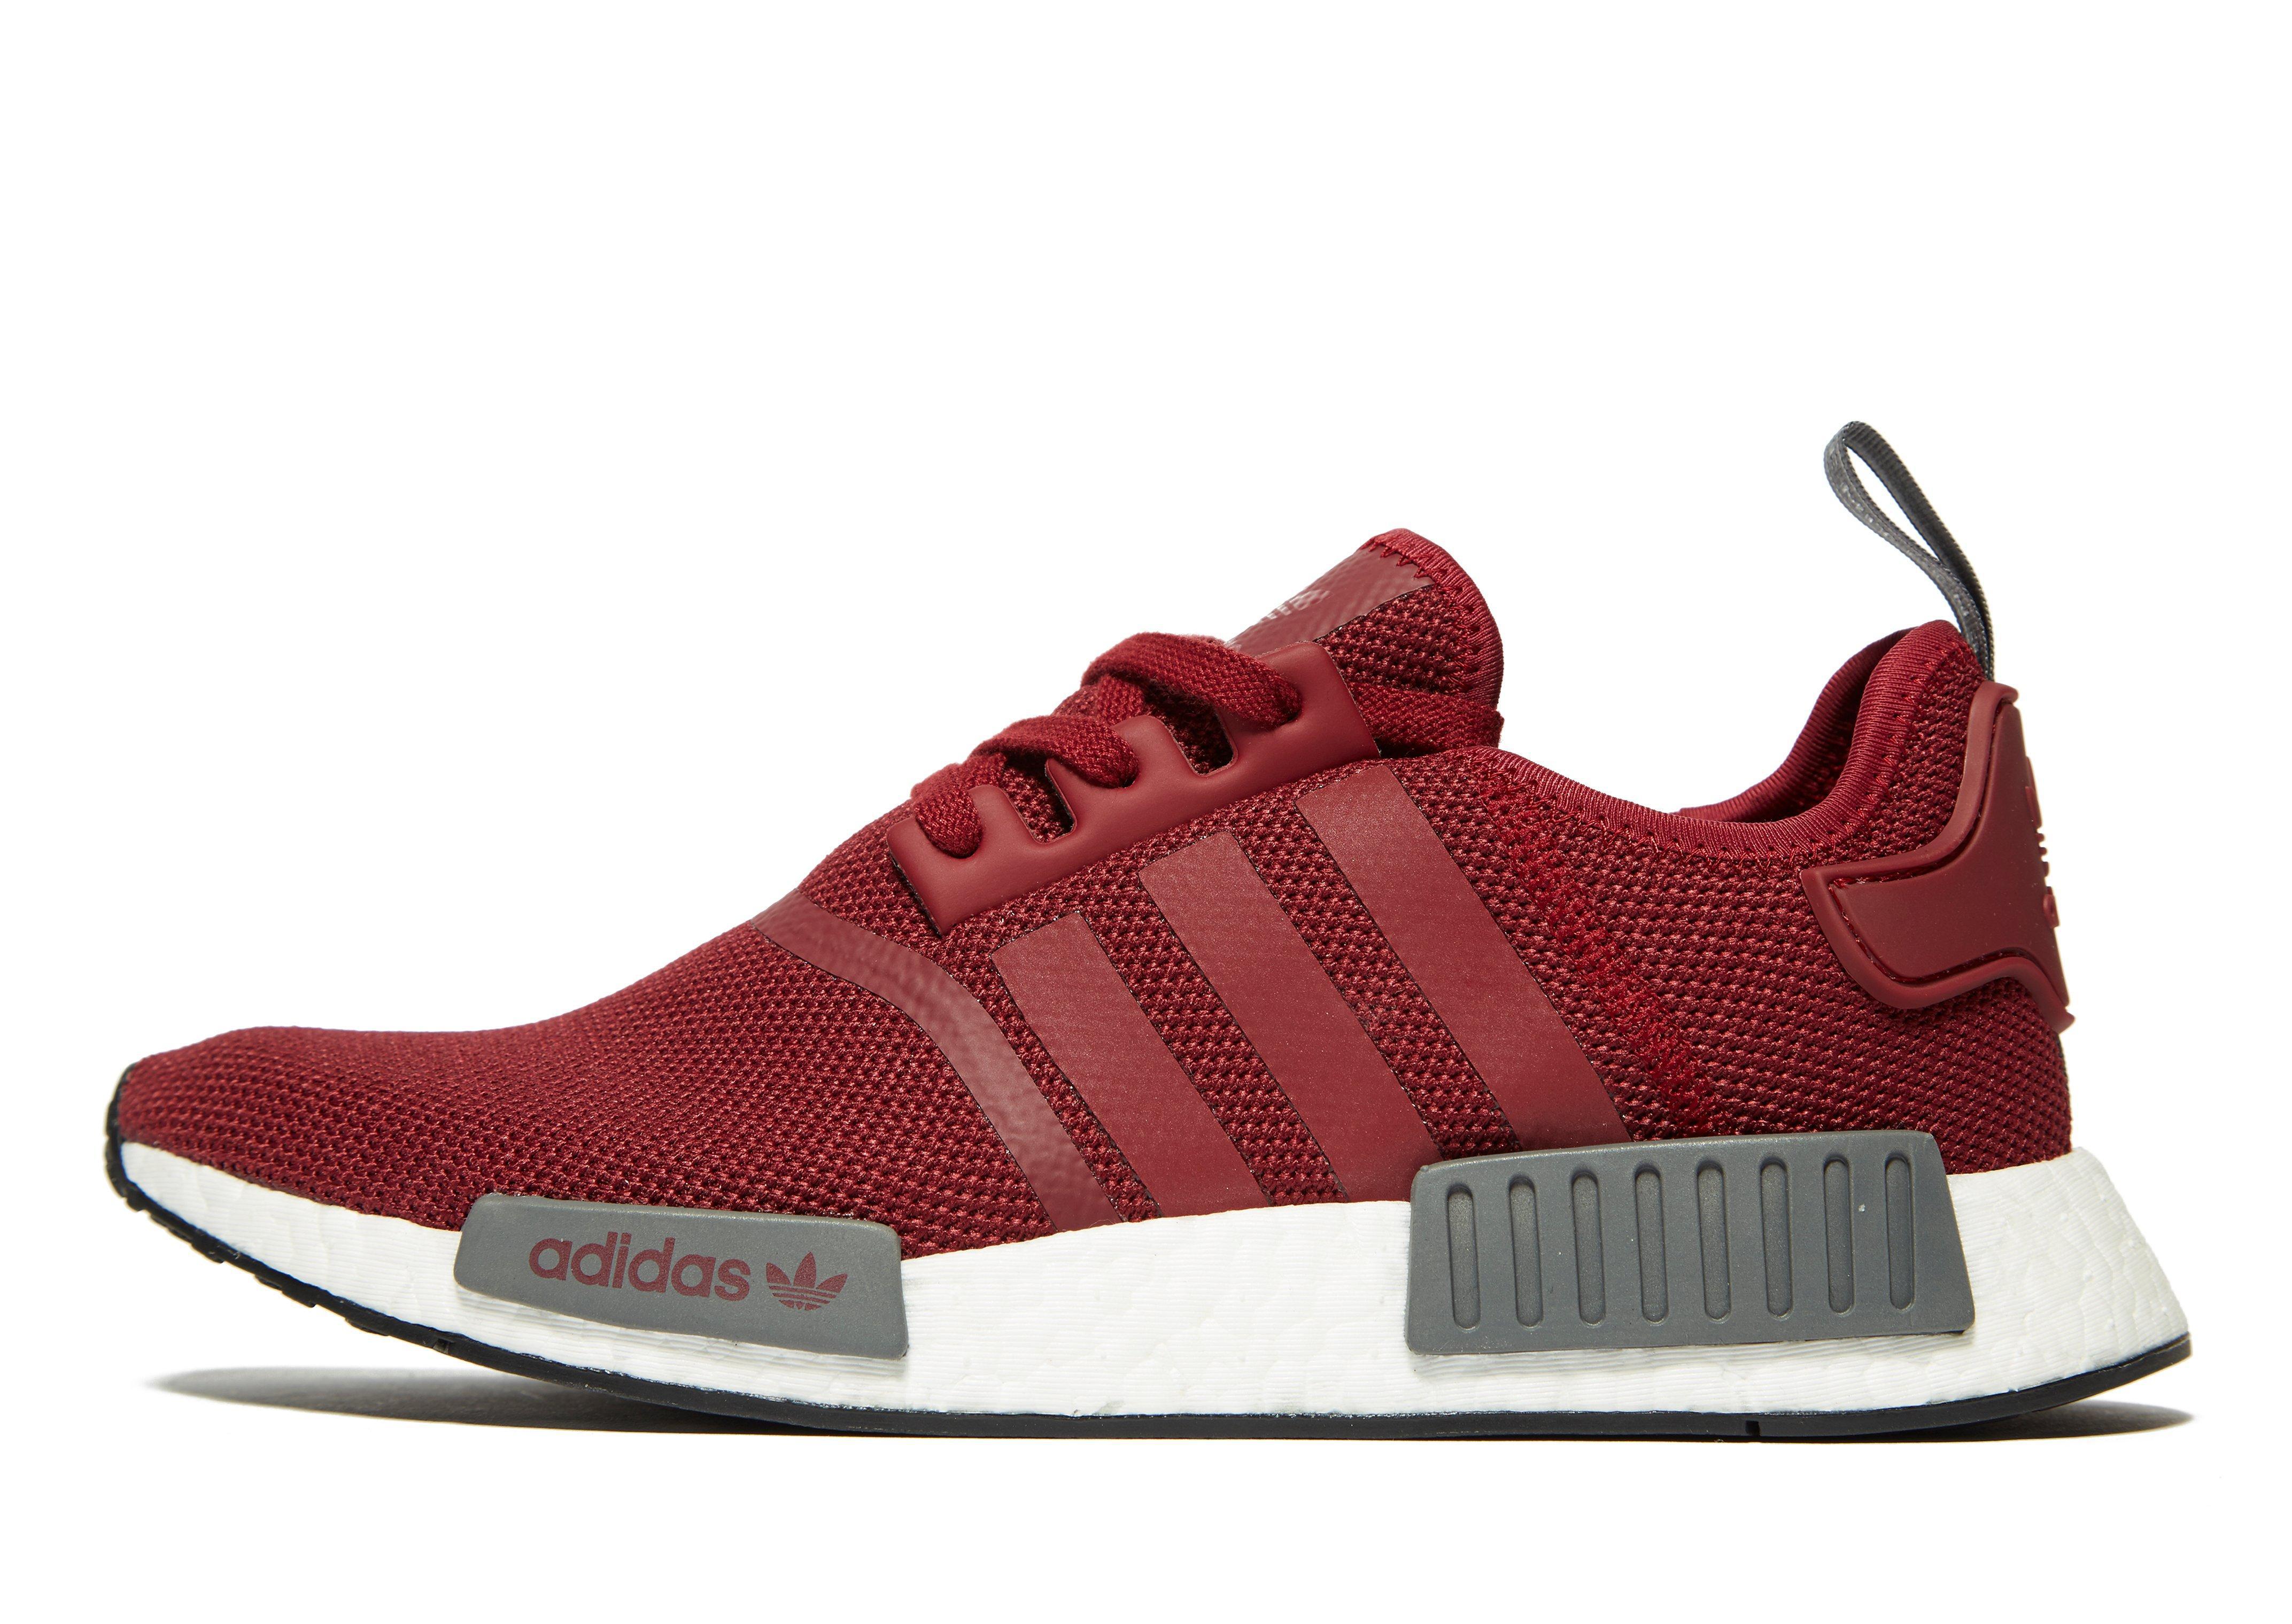 adidas Originals Synthetic Nmd R1 in Burgundy/Grey (Red) for Men - Lyst